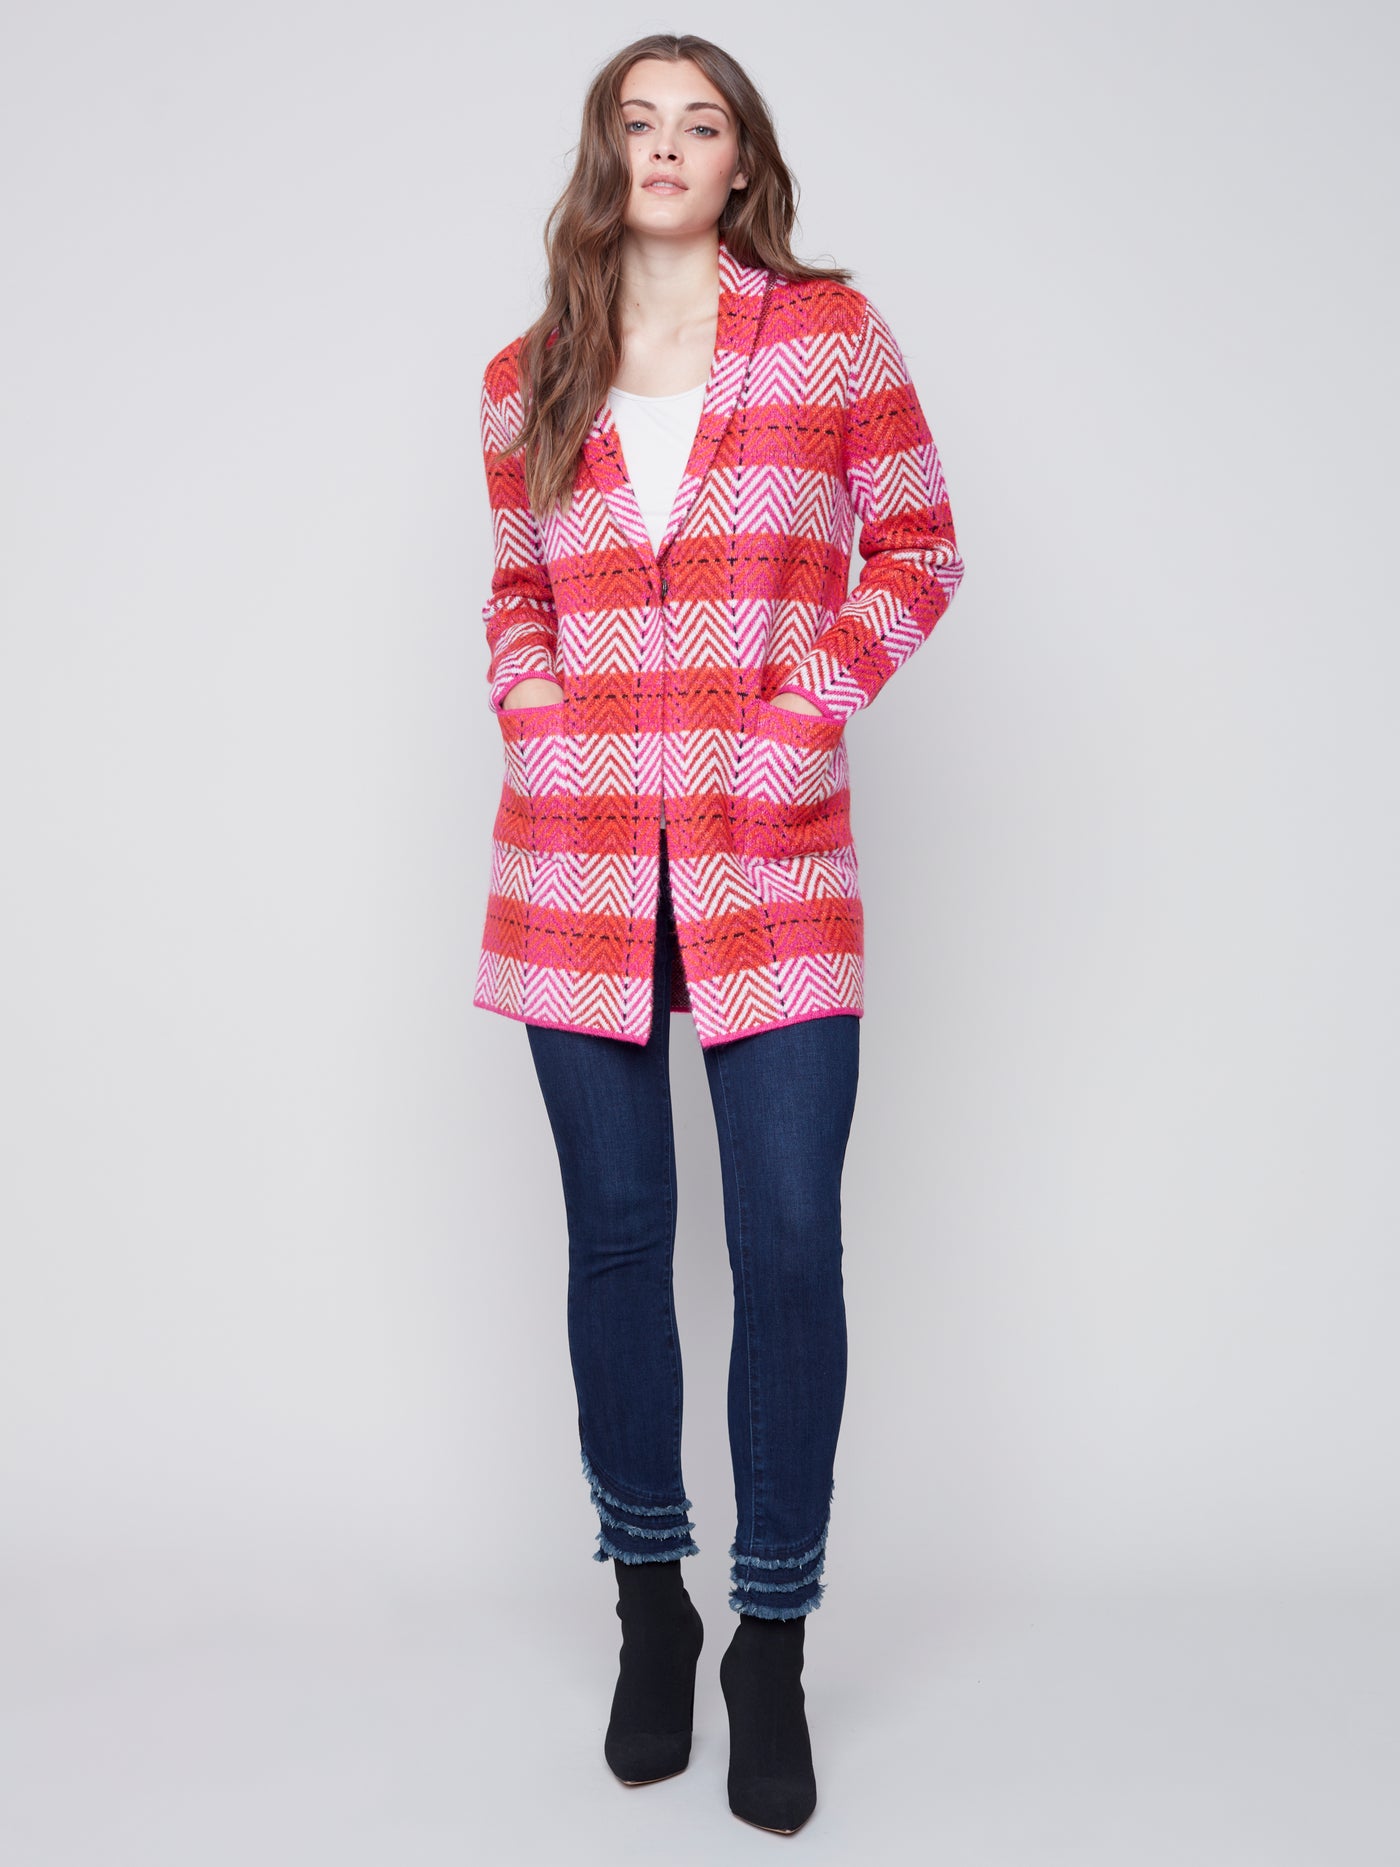 Charlie B Top - Plaid Cardigan - Pink Orchid